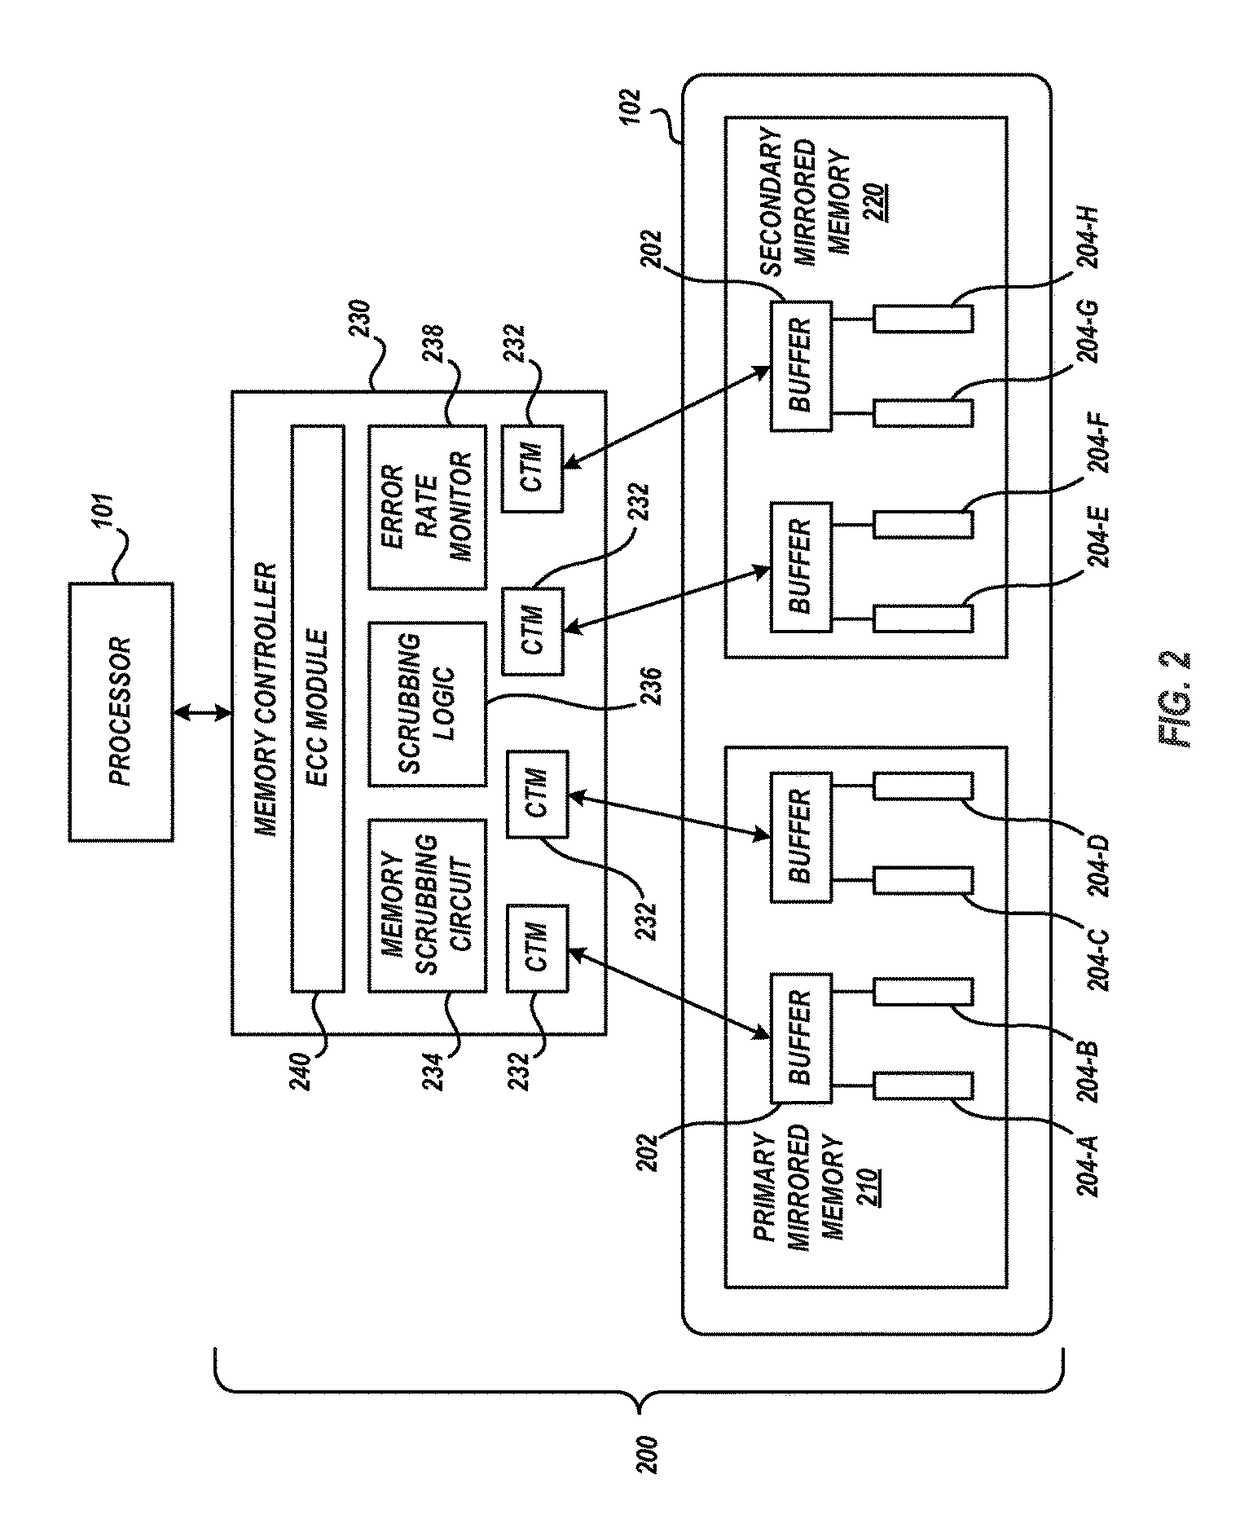 Memory scrubbing in a mirrored memory system to reduce system power consumption